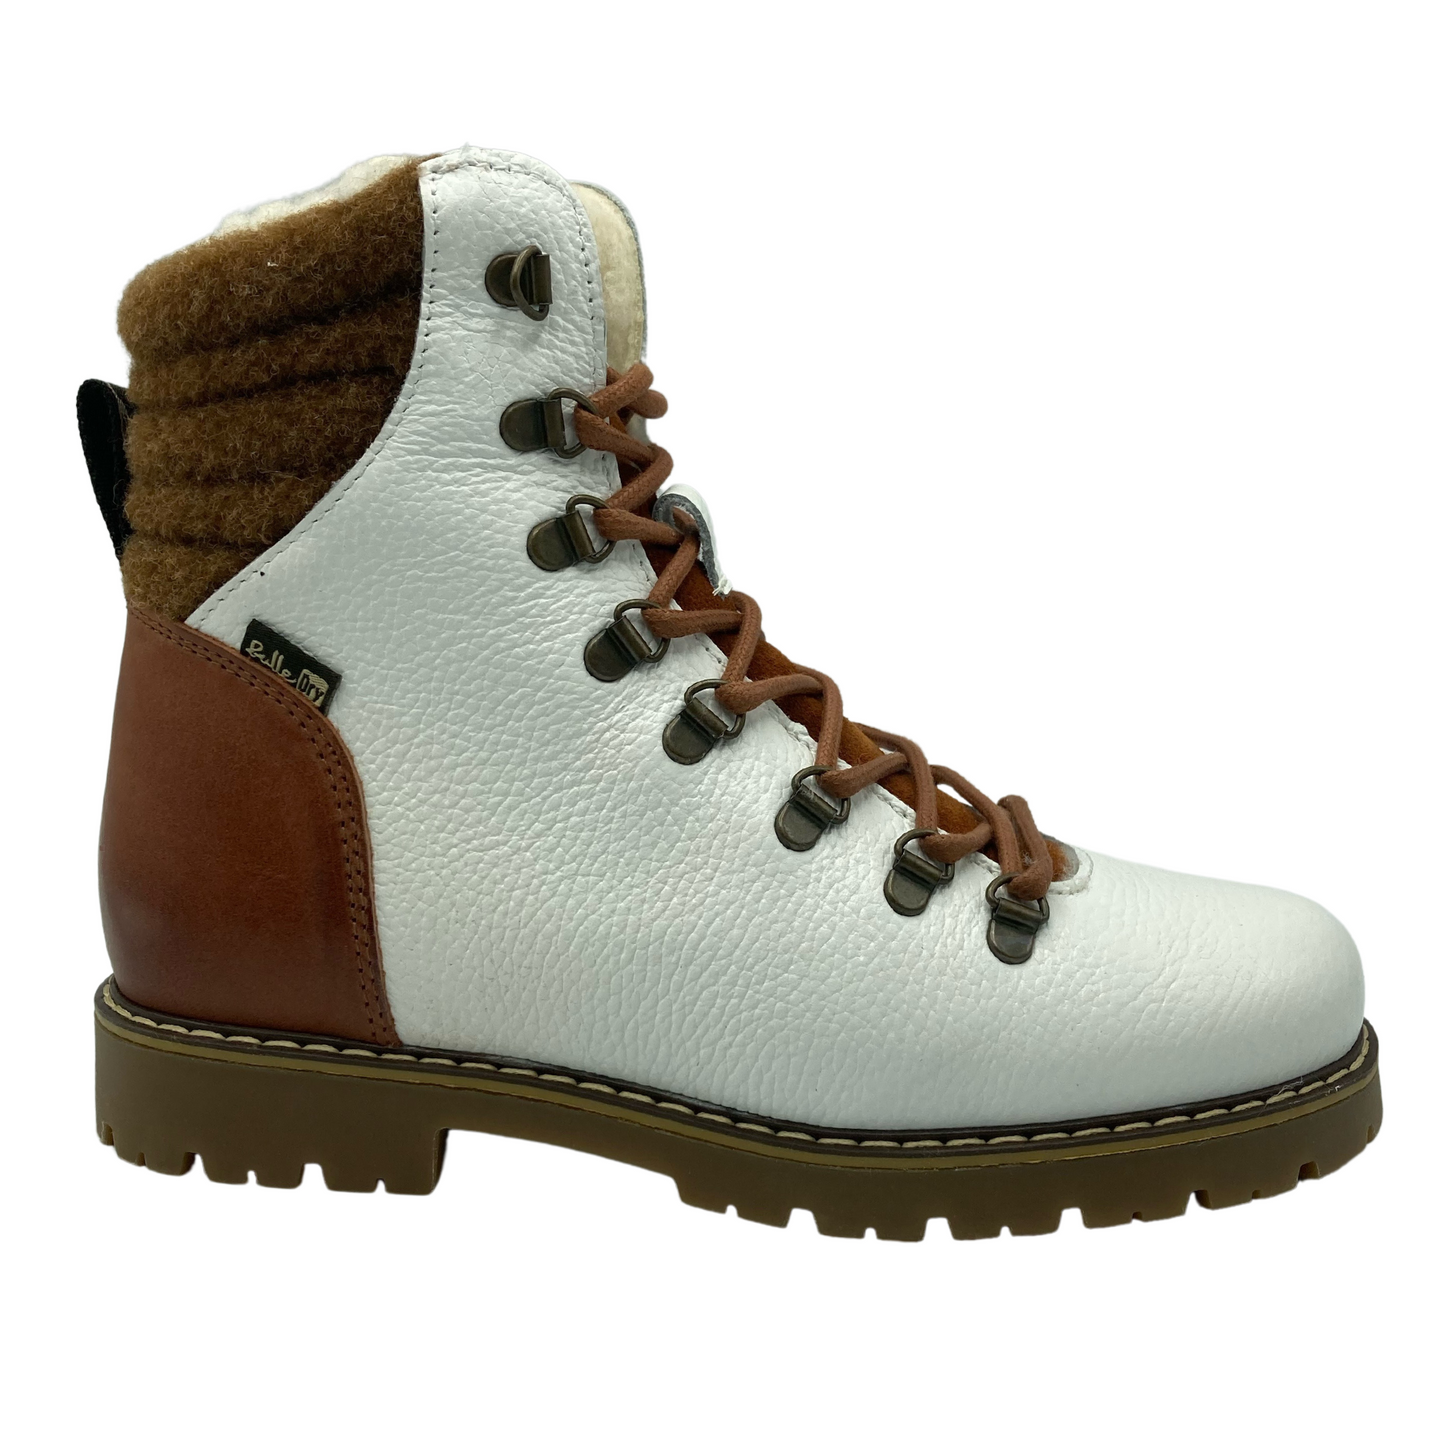 Right facing view of white leather short boot with wool lining and brown heel detail